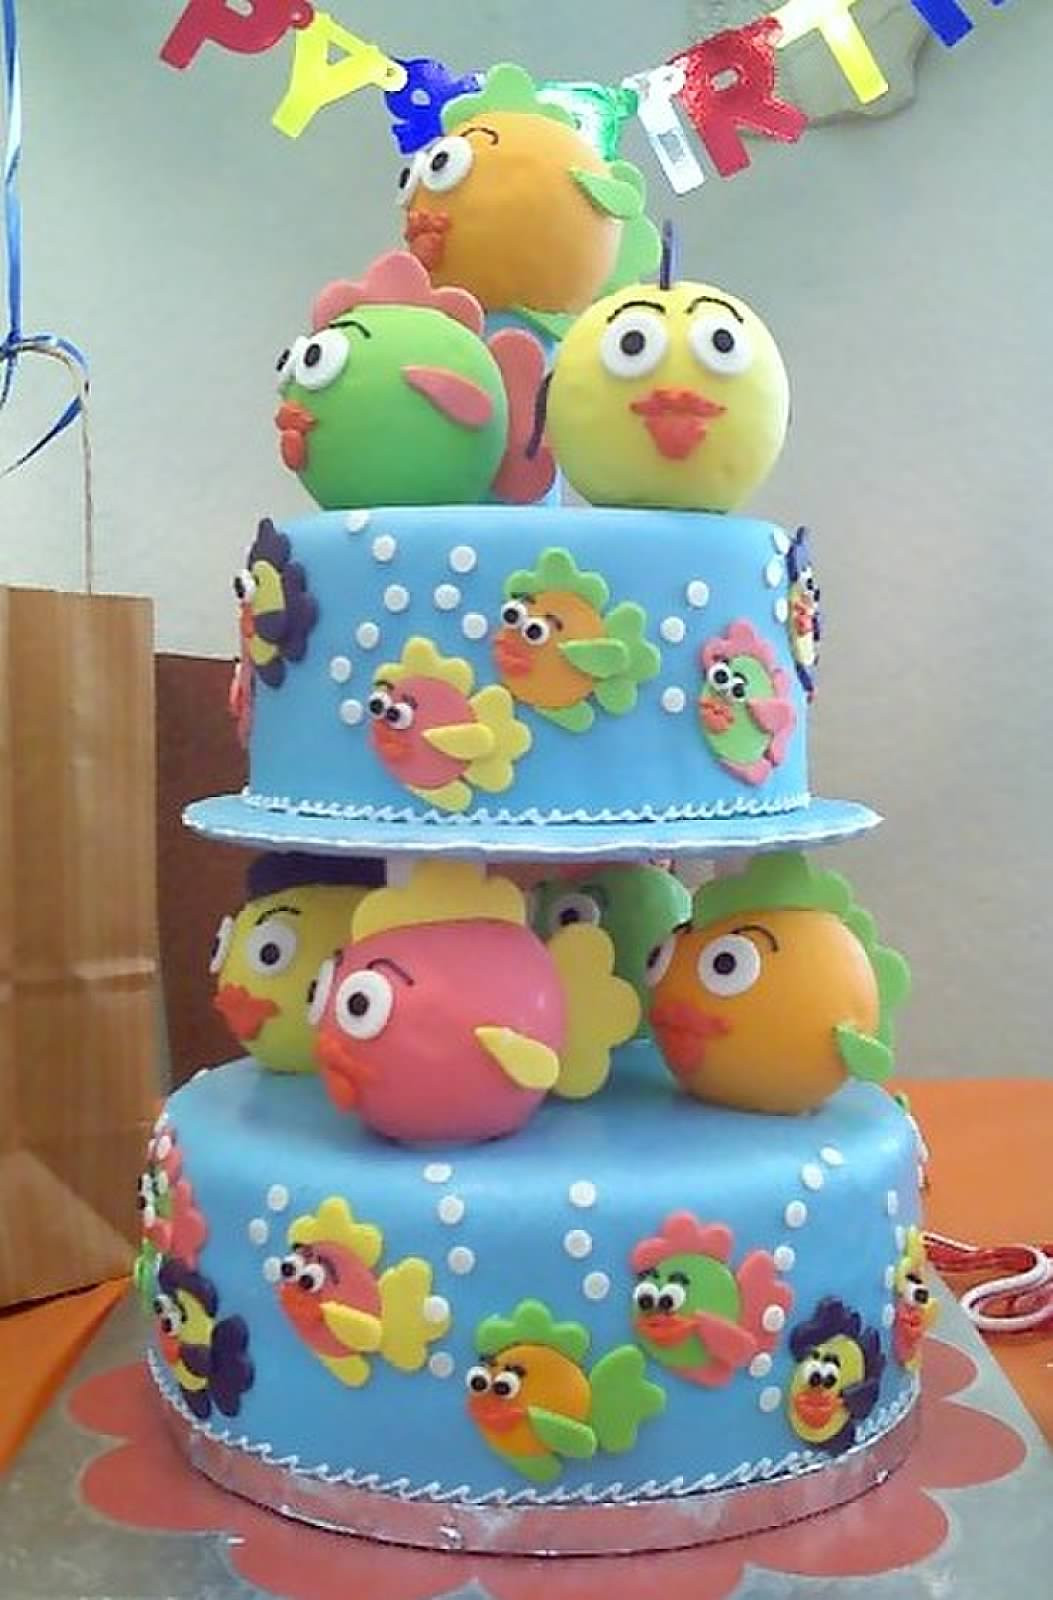 One Year Old Birthday Cake
 File Birthday cake for one year old